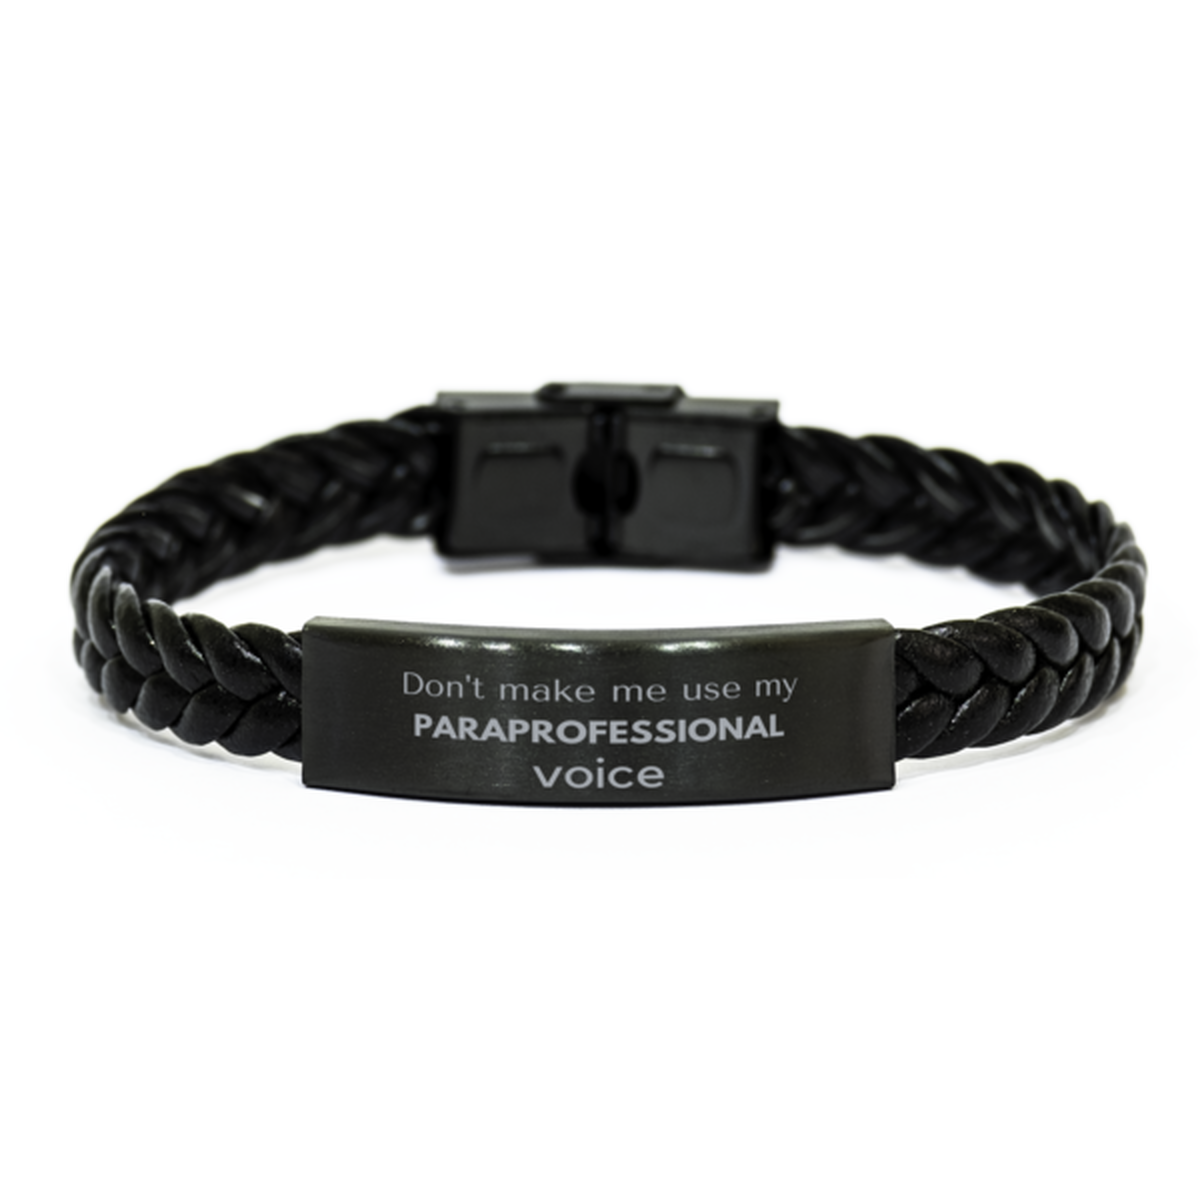 Don't make me use my Paraprofessional voice, Sarcasm Paraprofessional Gifts, Christmas Paraprofessional Braided Leather Bracelet Birthday Unique Gifts For Paraprofessional Coworkers, Men, Women, Colleague, Friends